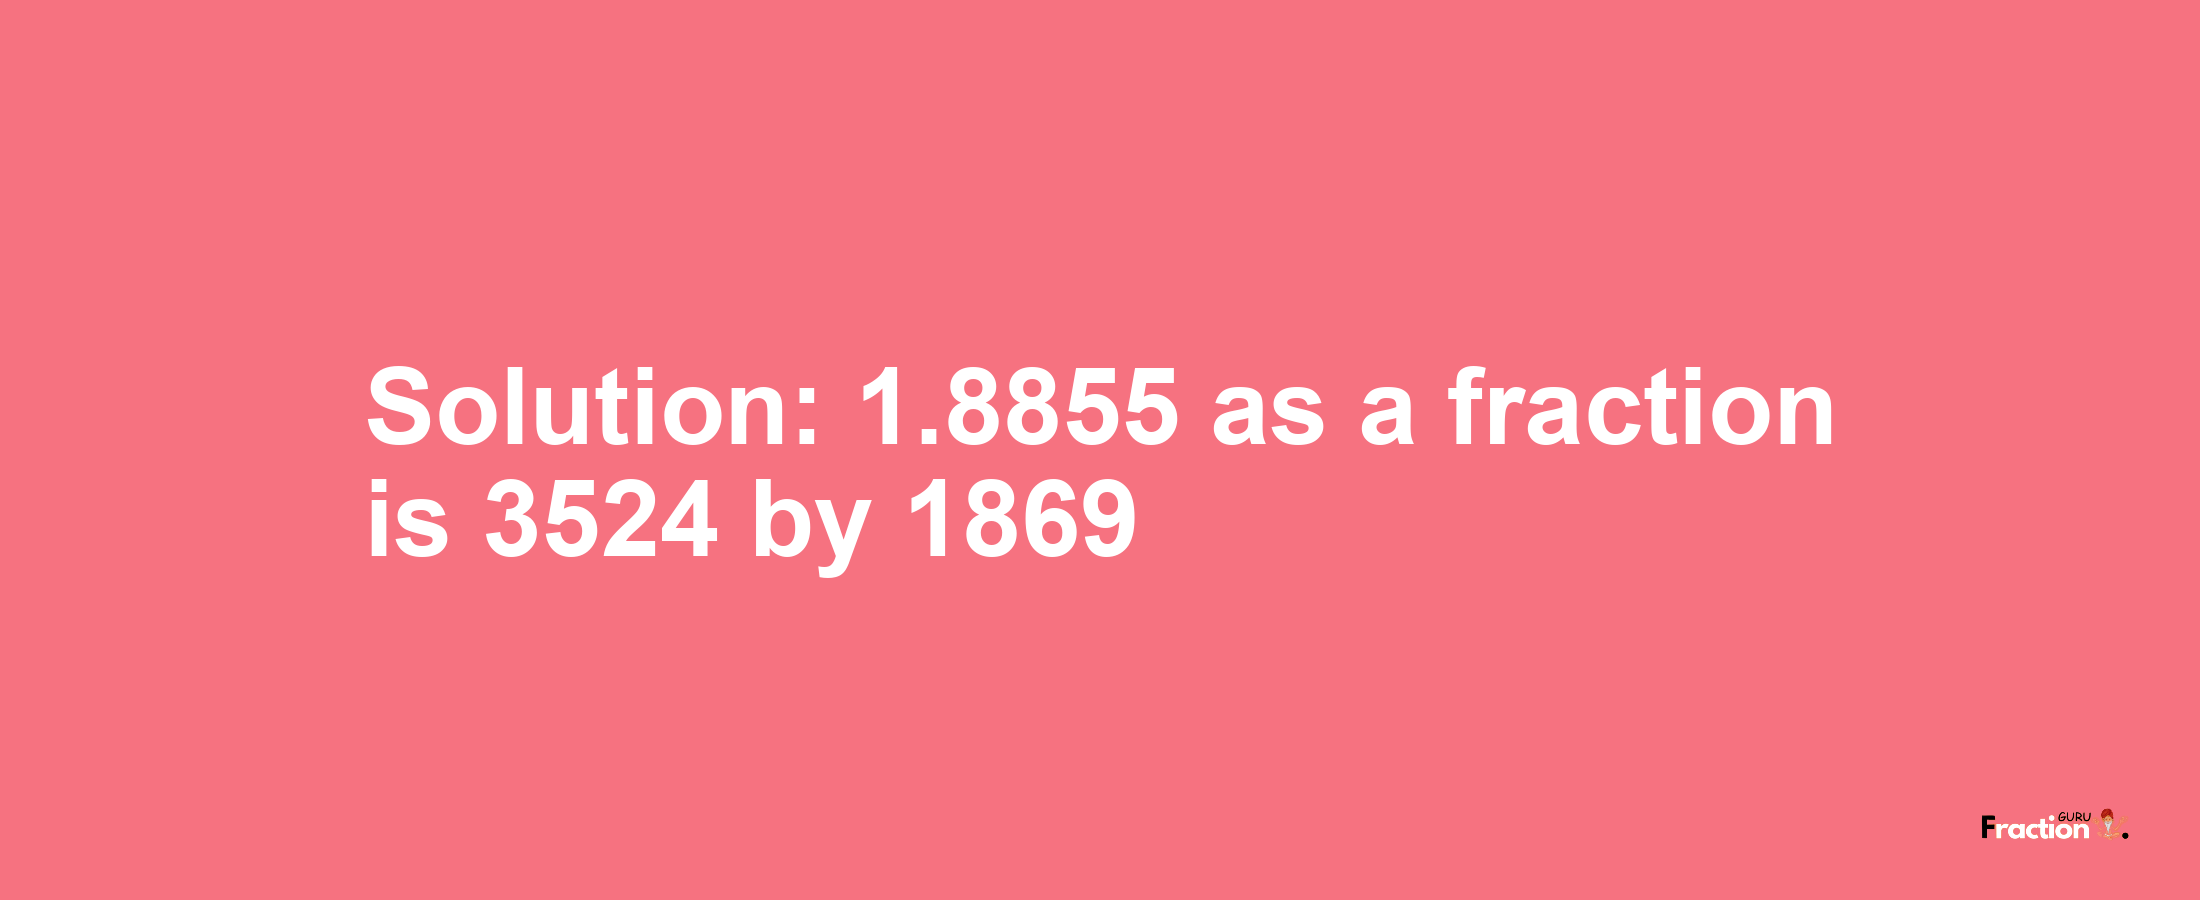 Solution:1.8855 as a fraction is 3524/1869